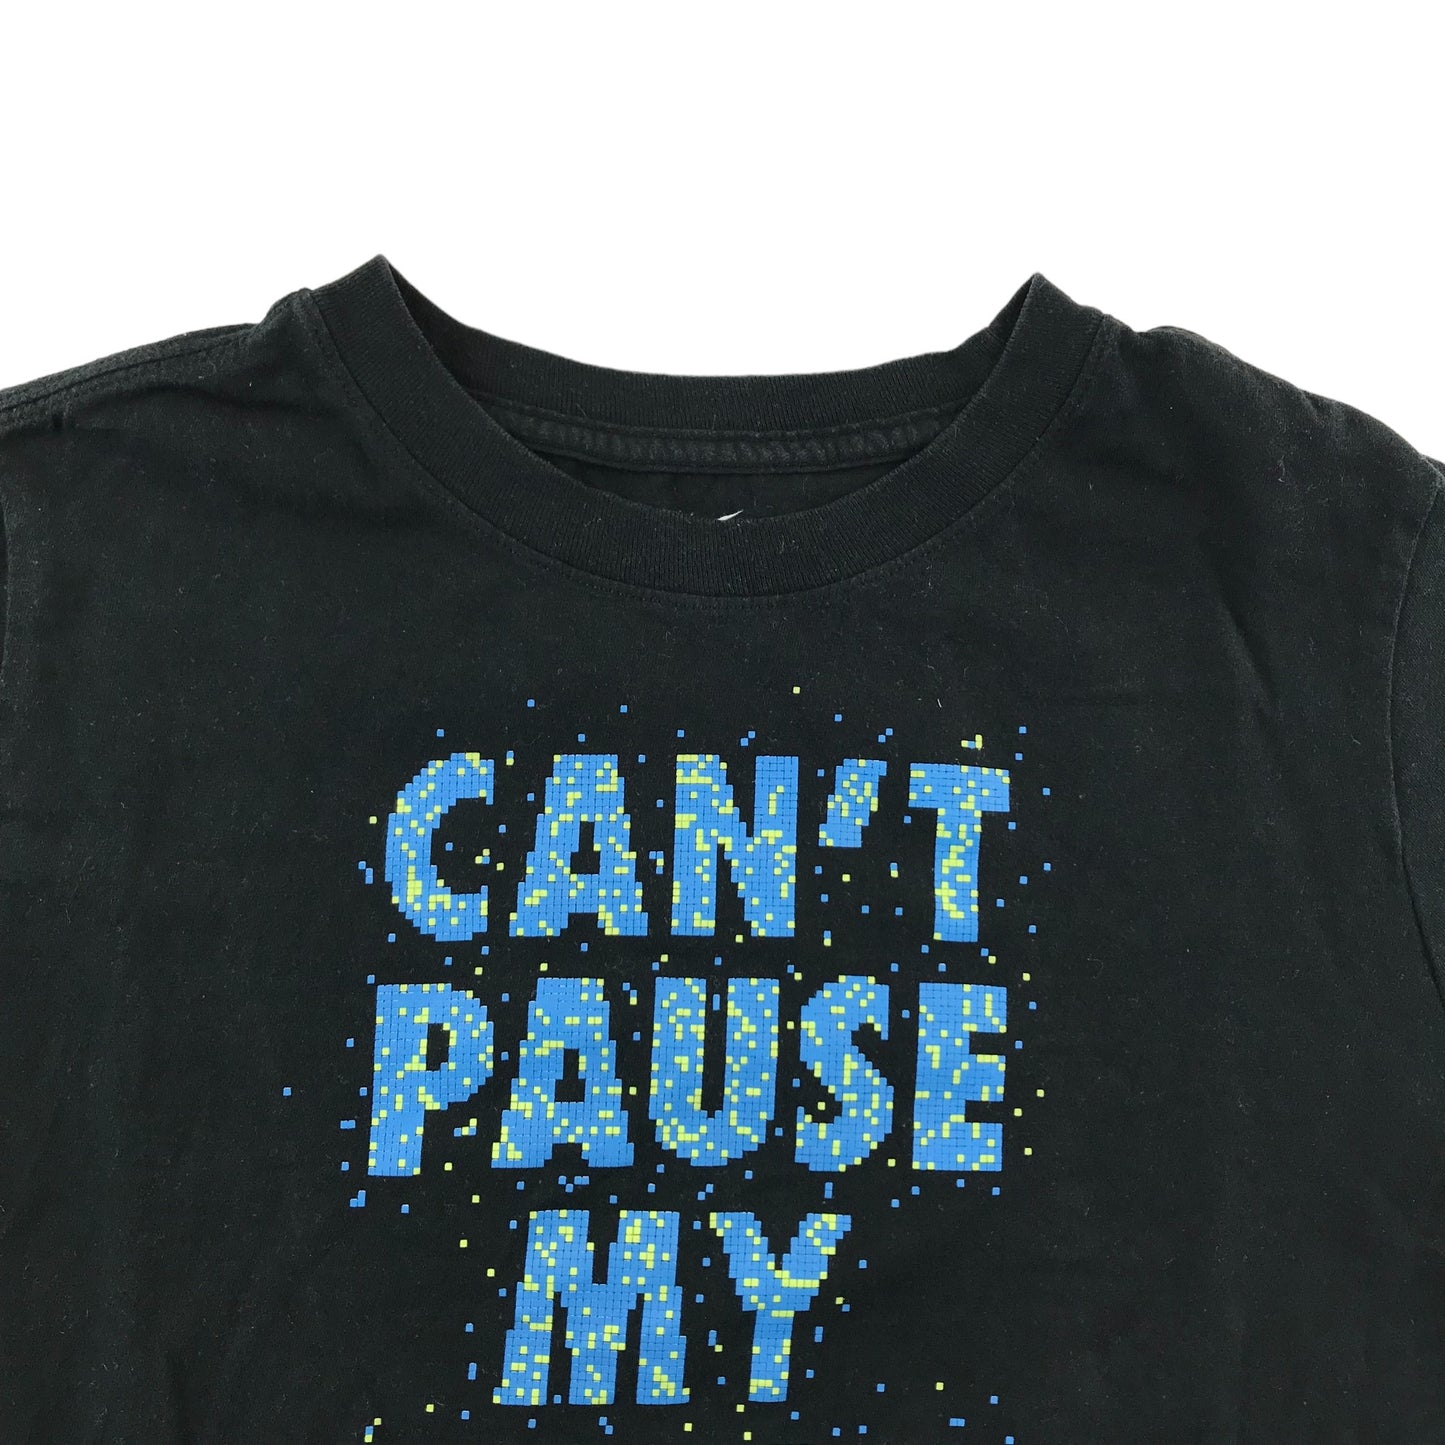 Nike T-shirt Age 12-14 Black Can't Pause My Game Print Text Cotton